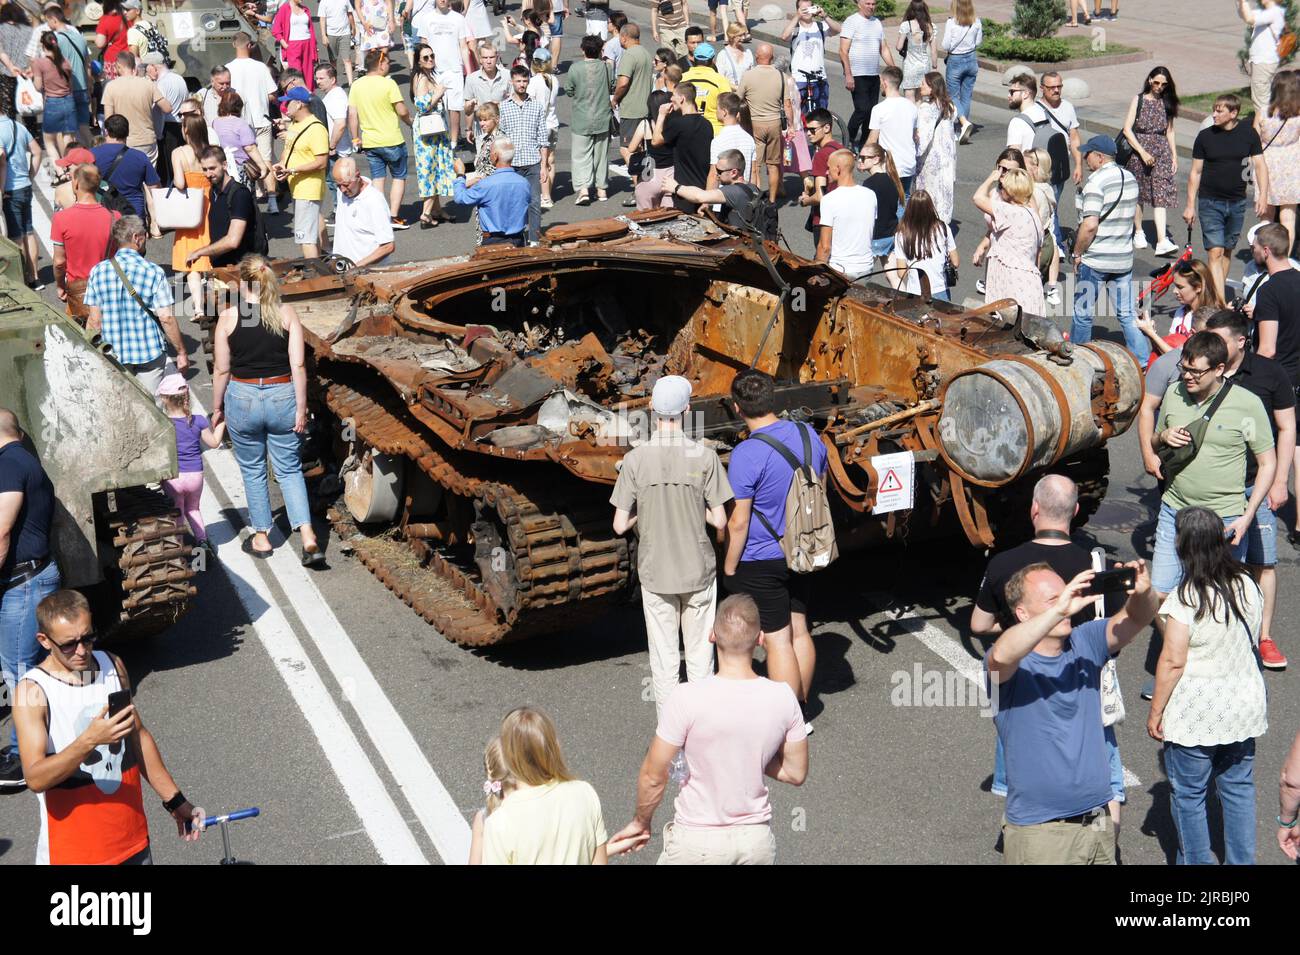 Kyiv, Kyiv Ukraine, August 21 2022: Russian military equipment destroyed. Display for Independence Day parade on Khreshchatyk street Stock Photo